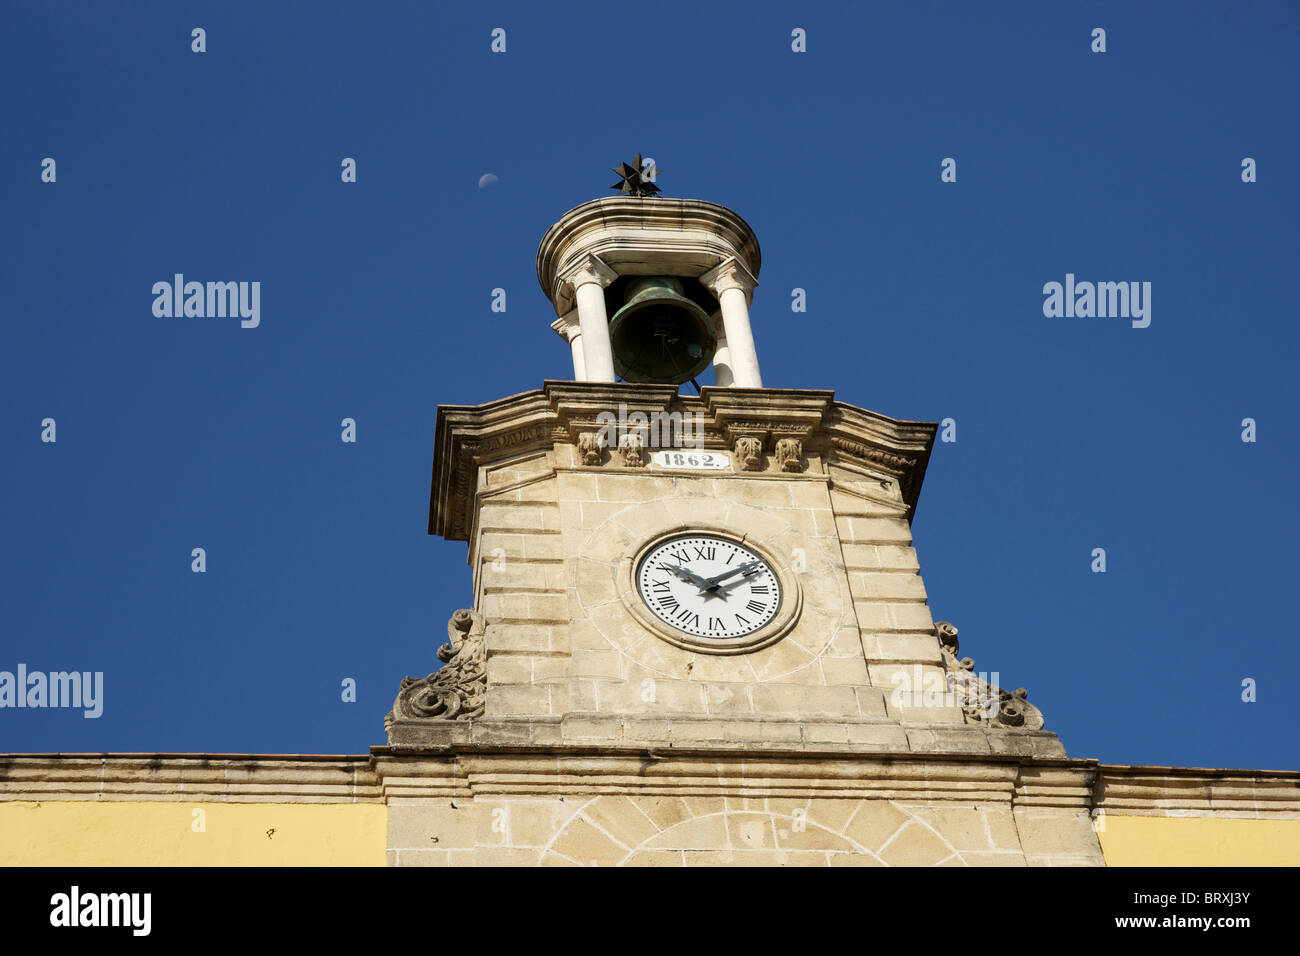 Old Bell tower with clock in Jerez. Daytime, though the Moon is visible in the clear blue sky. Stock Photo